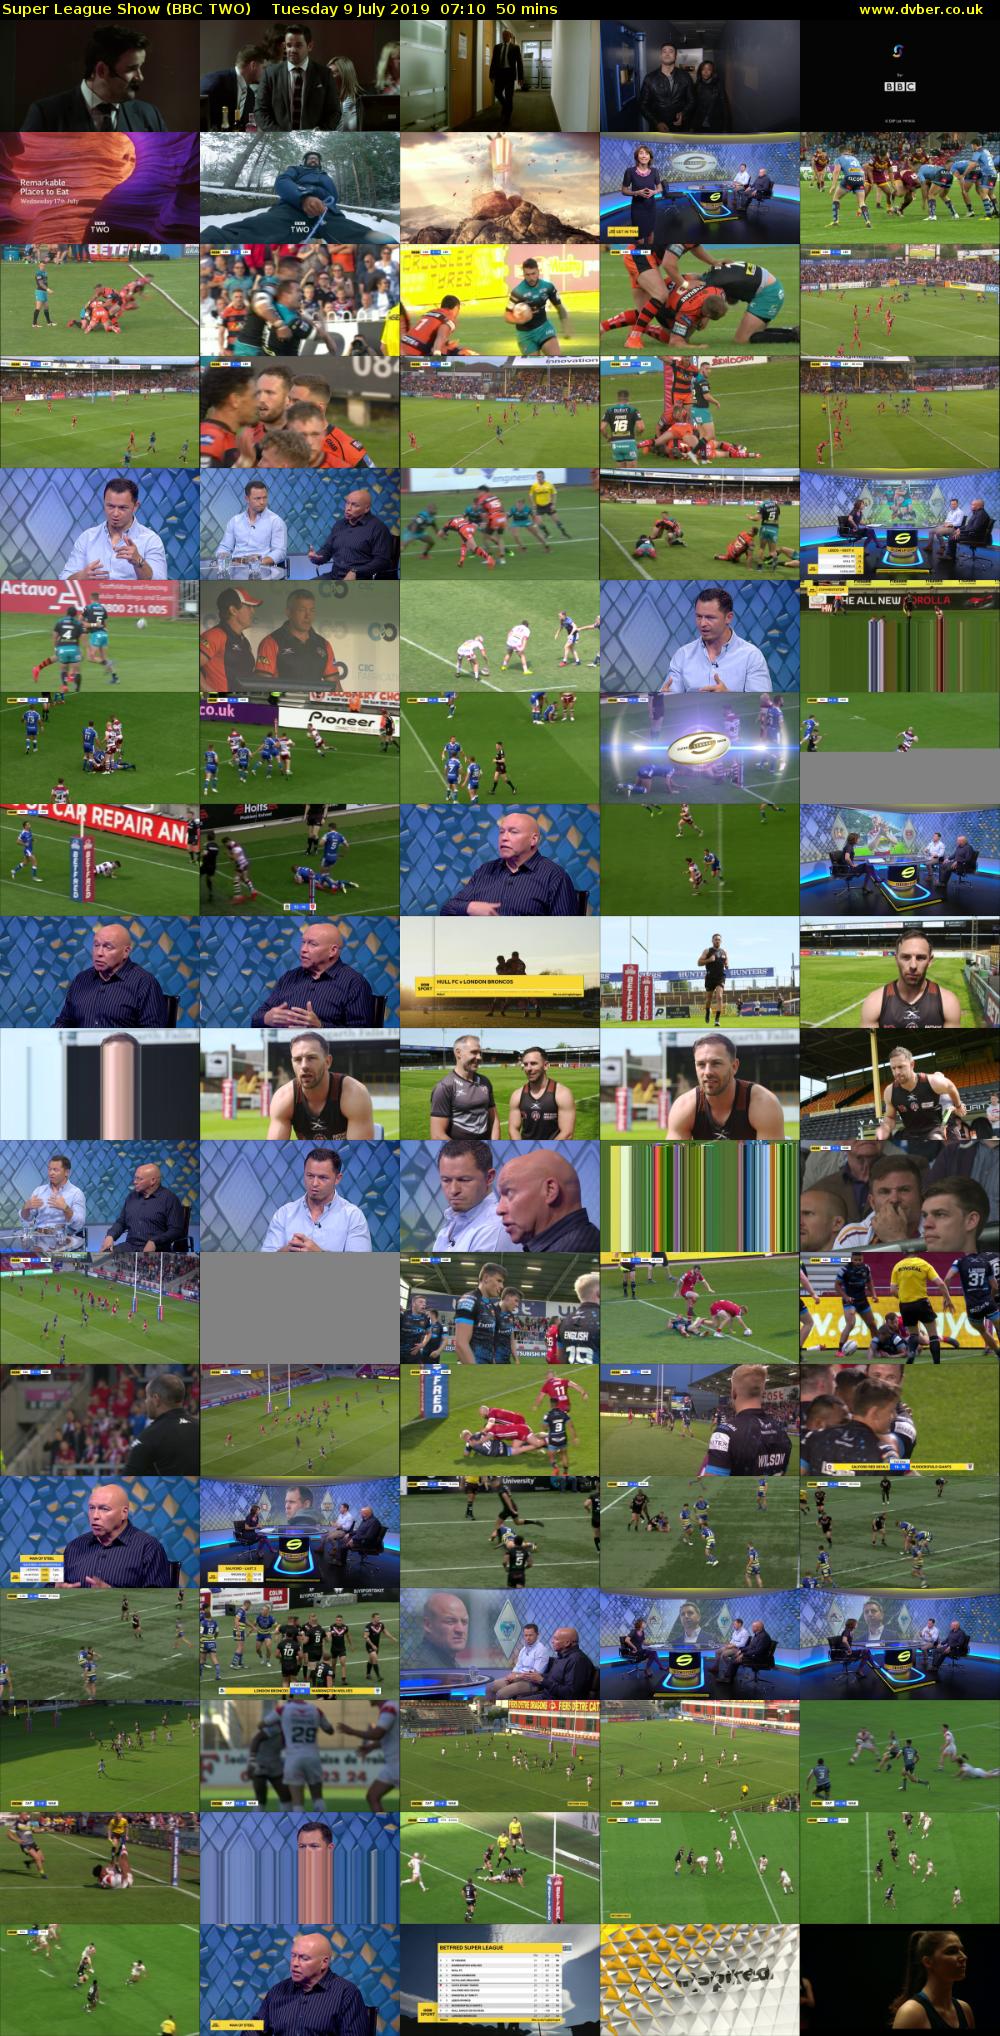 Super League Show (BBC TWO) Tuesday 9 July 2019 07:10 - 08:00